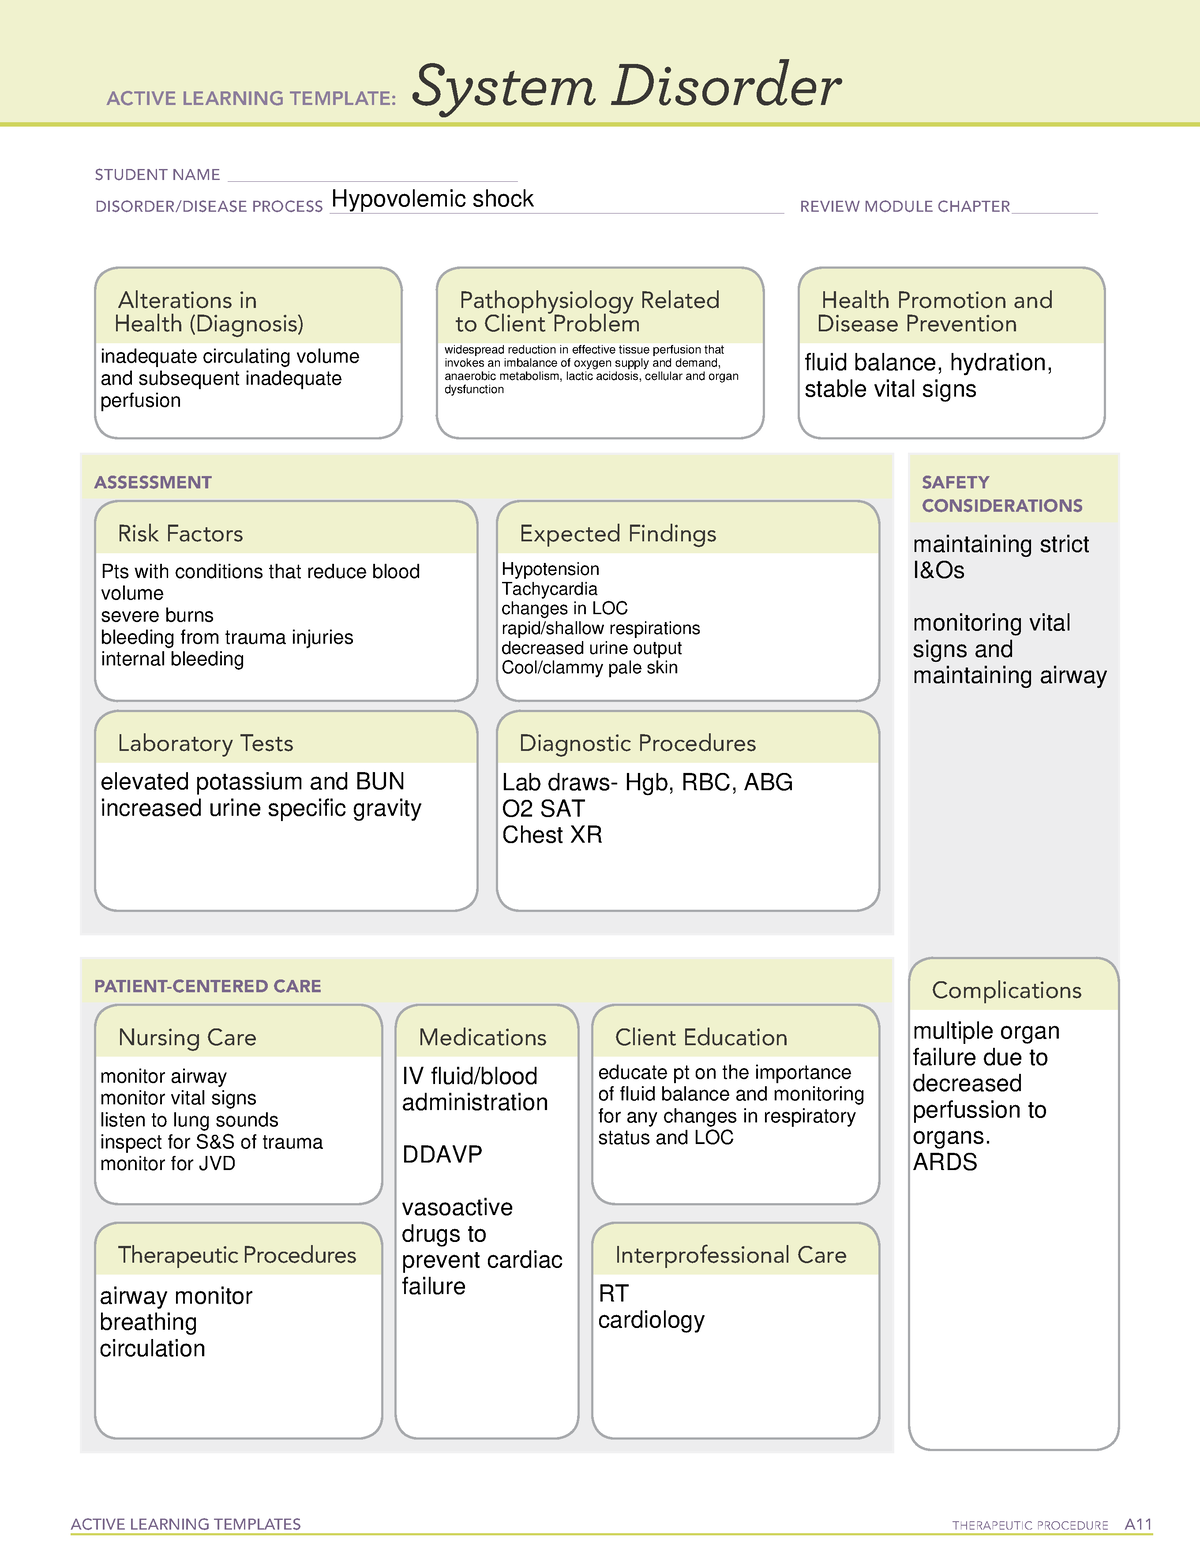 Active Learning Template ATI Hypovolemic Shock - ACTIVE LEARNING ...